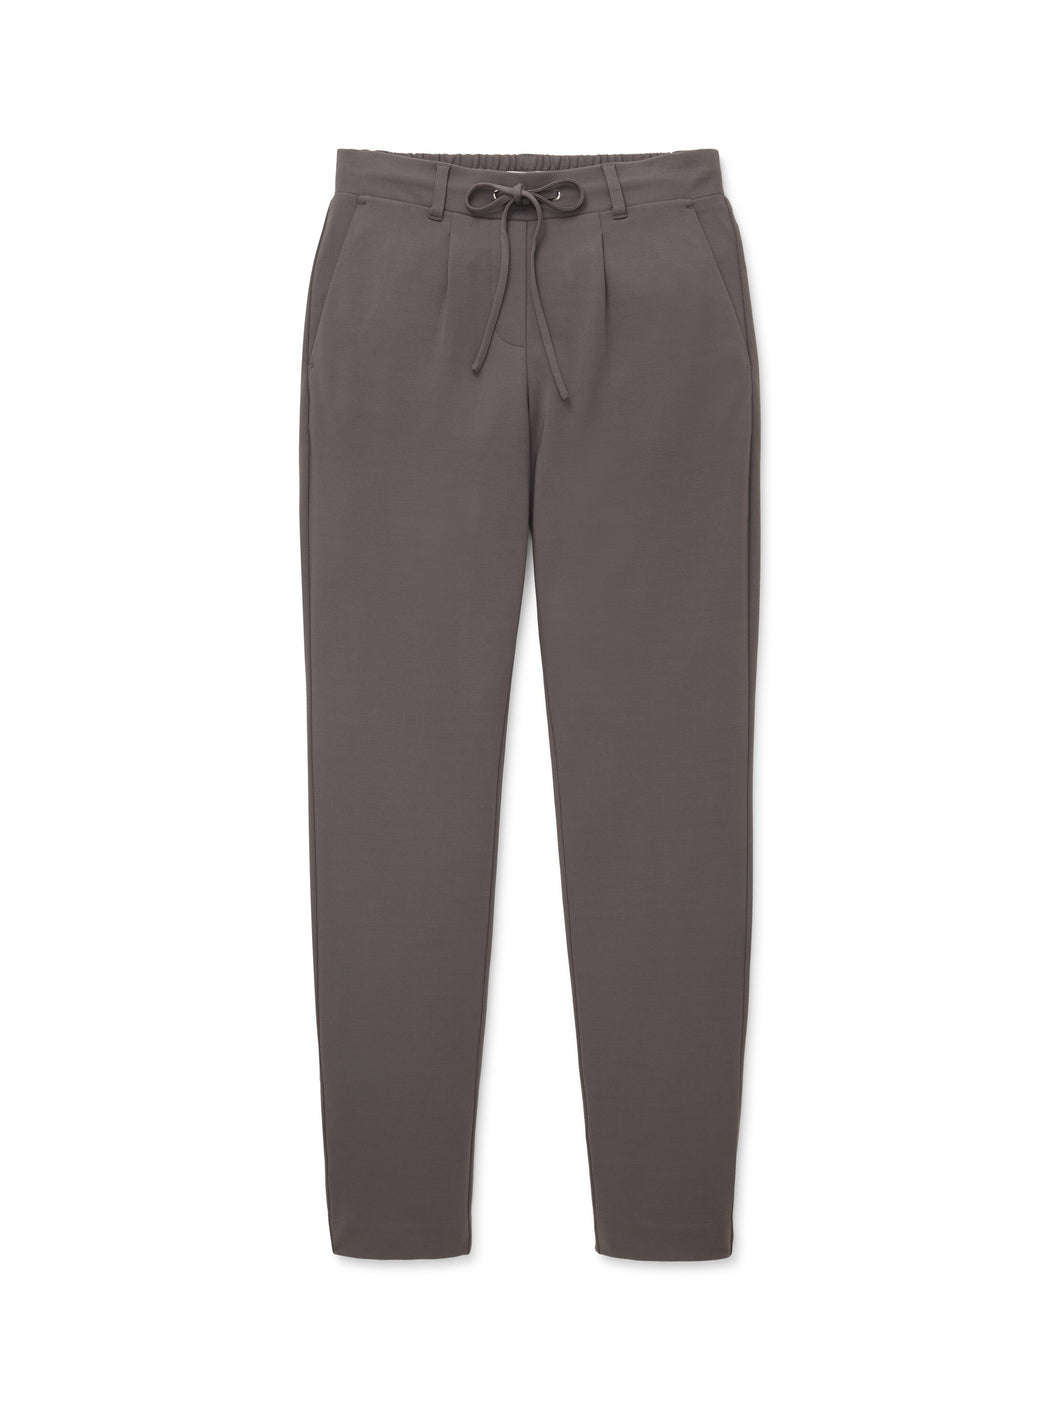 TOM TAILOR JERSEY LOOSE FIT PANTS ANKLE dark mineral grey